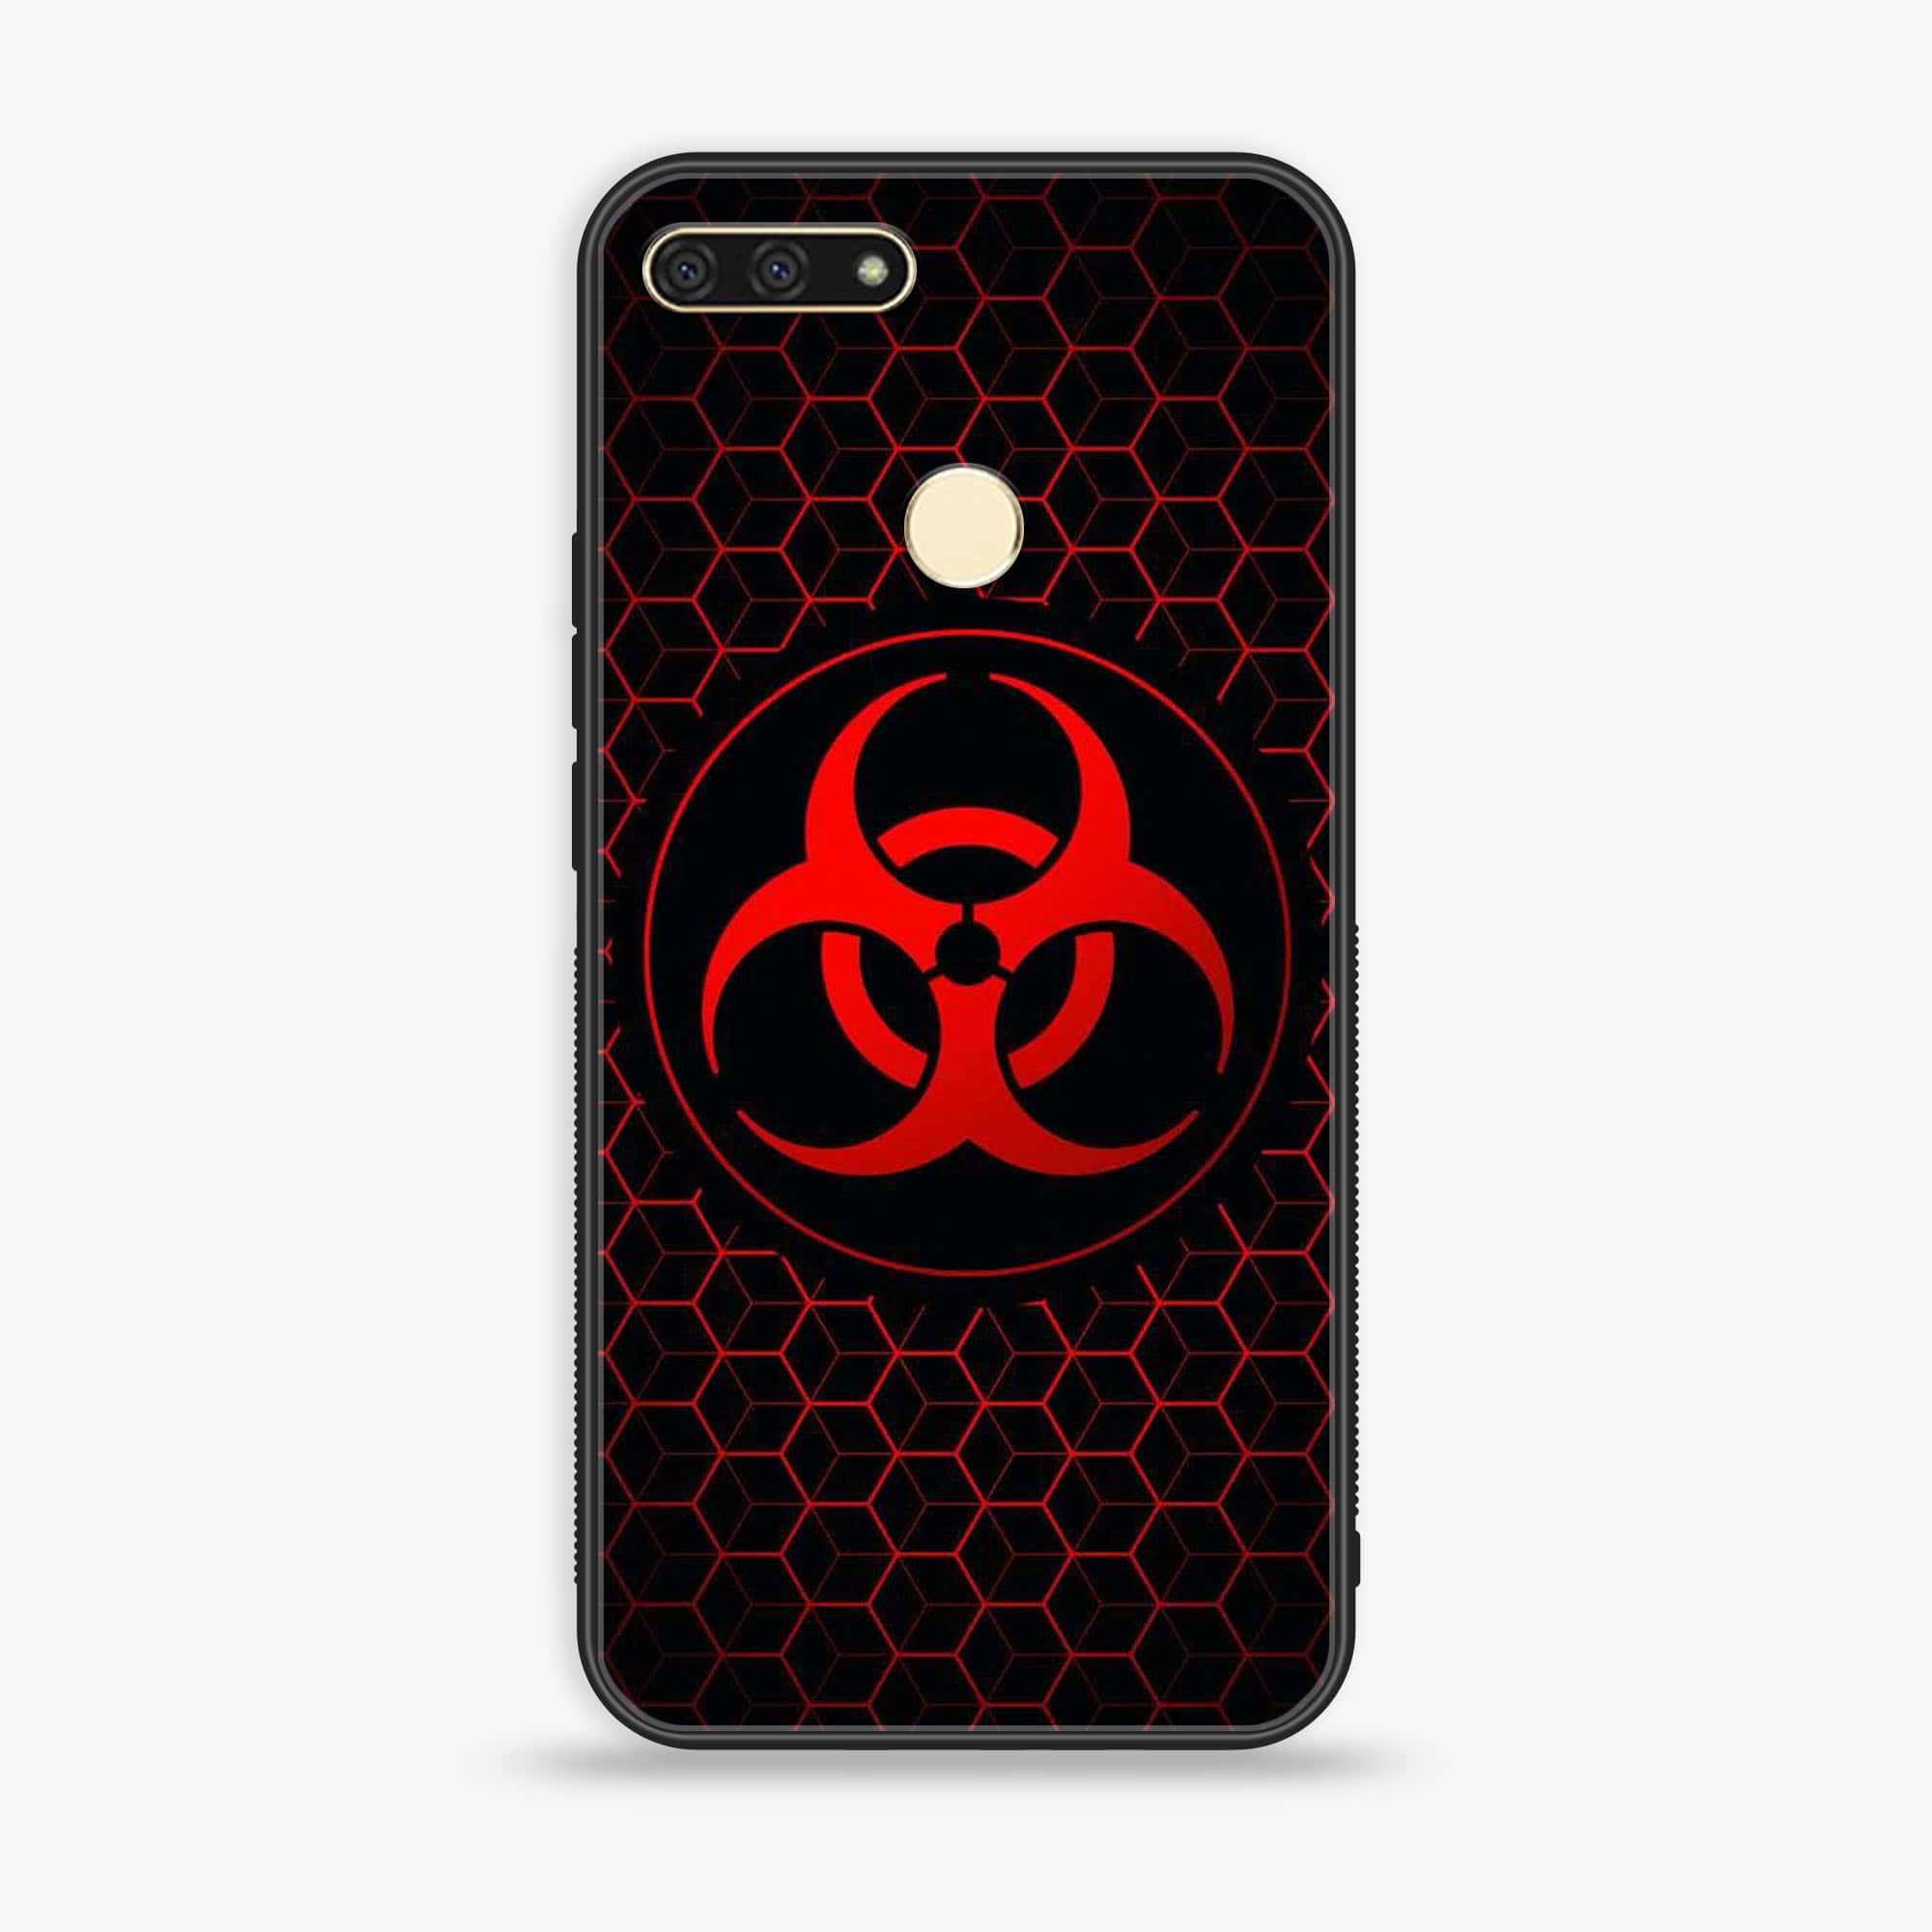 Huawei Y6 2018/Honor Play 7A - Biohazard Sign Series - Premium Printed Glass soft Bumper shock Proof Case